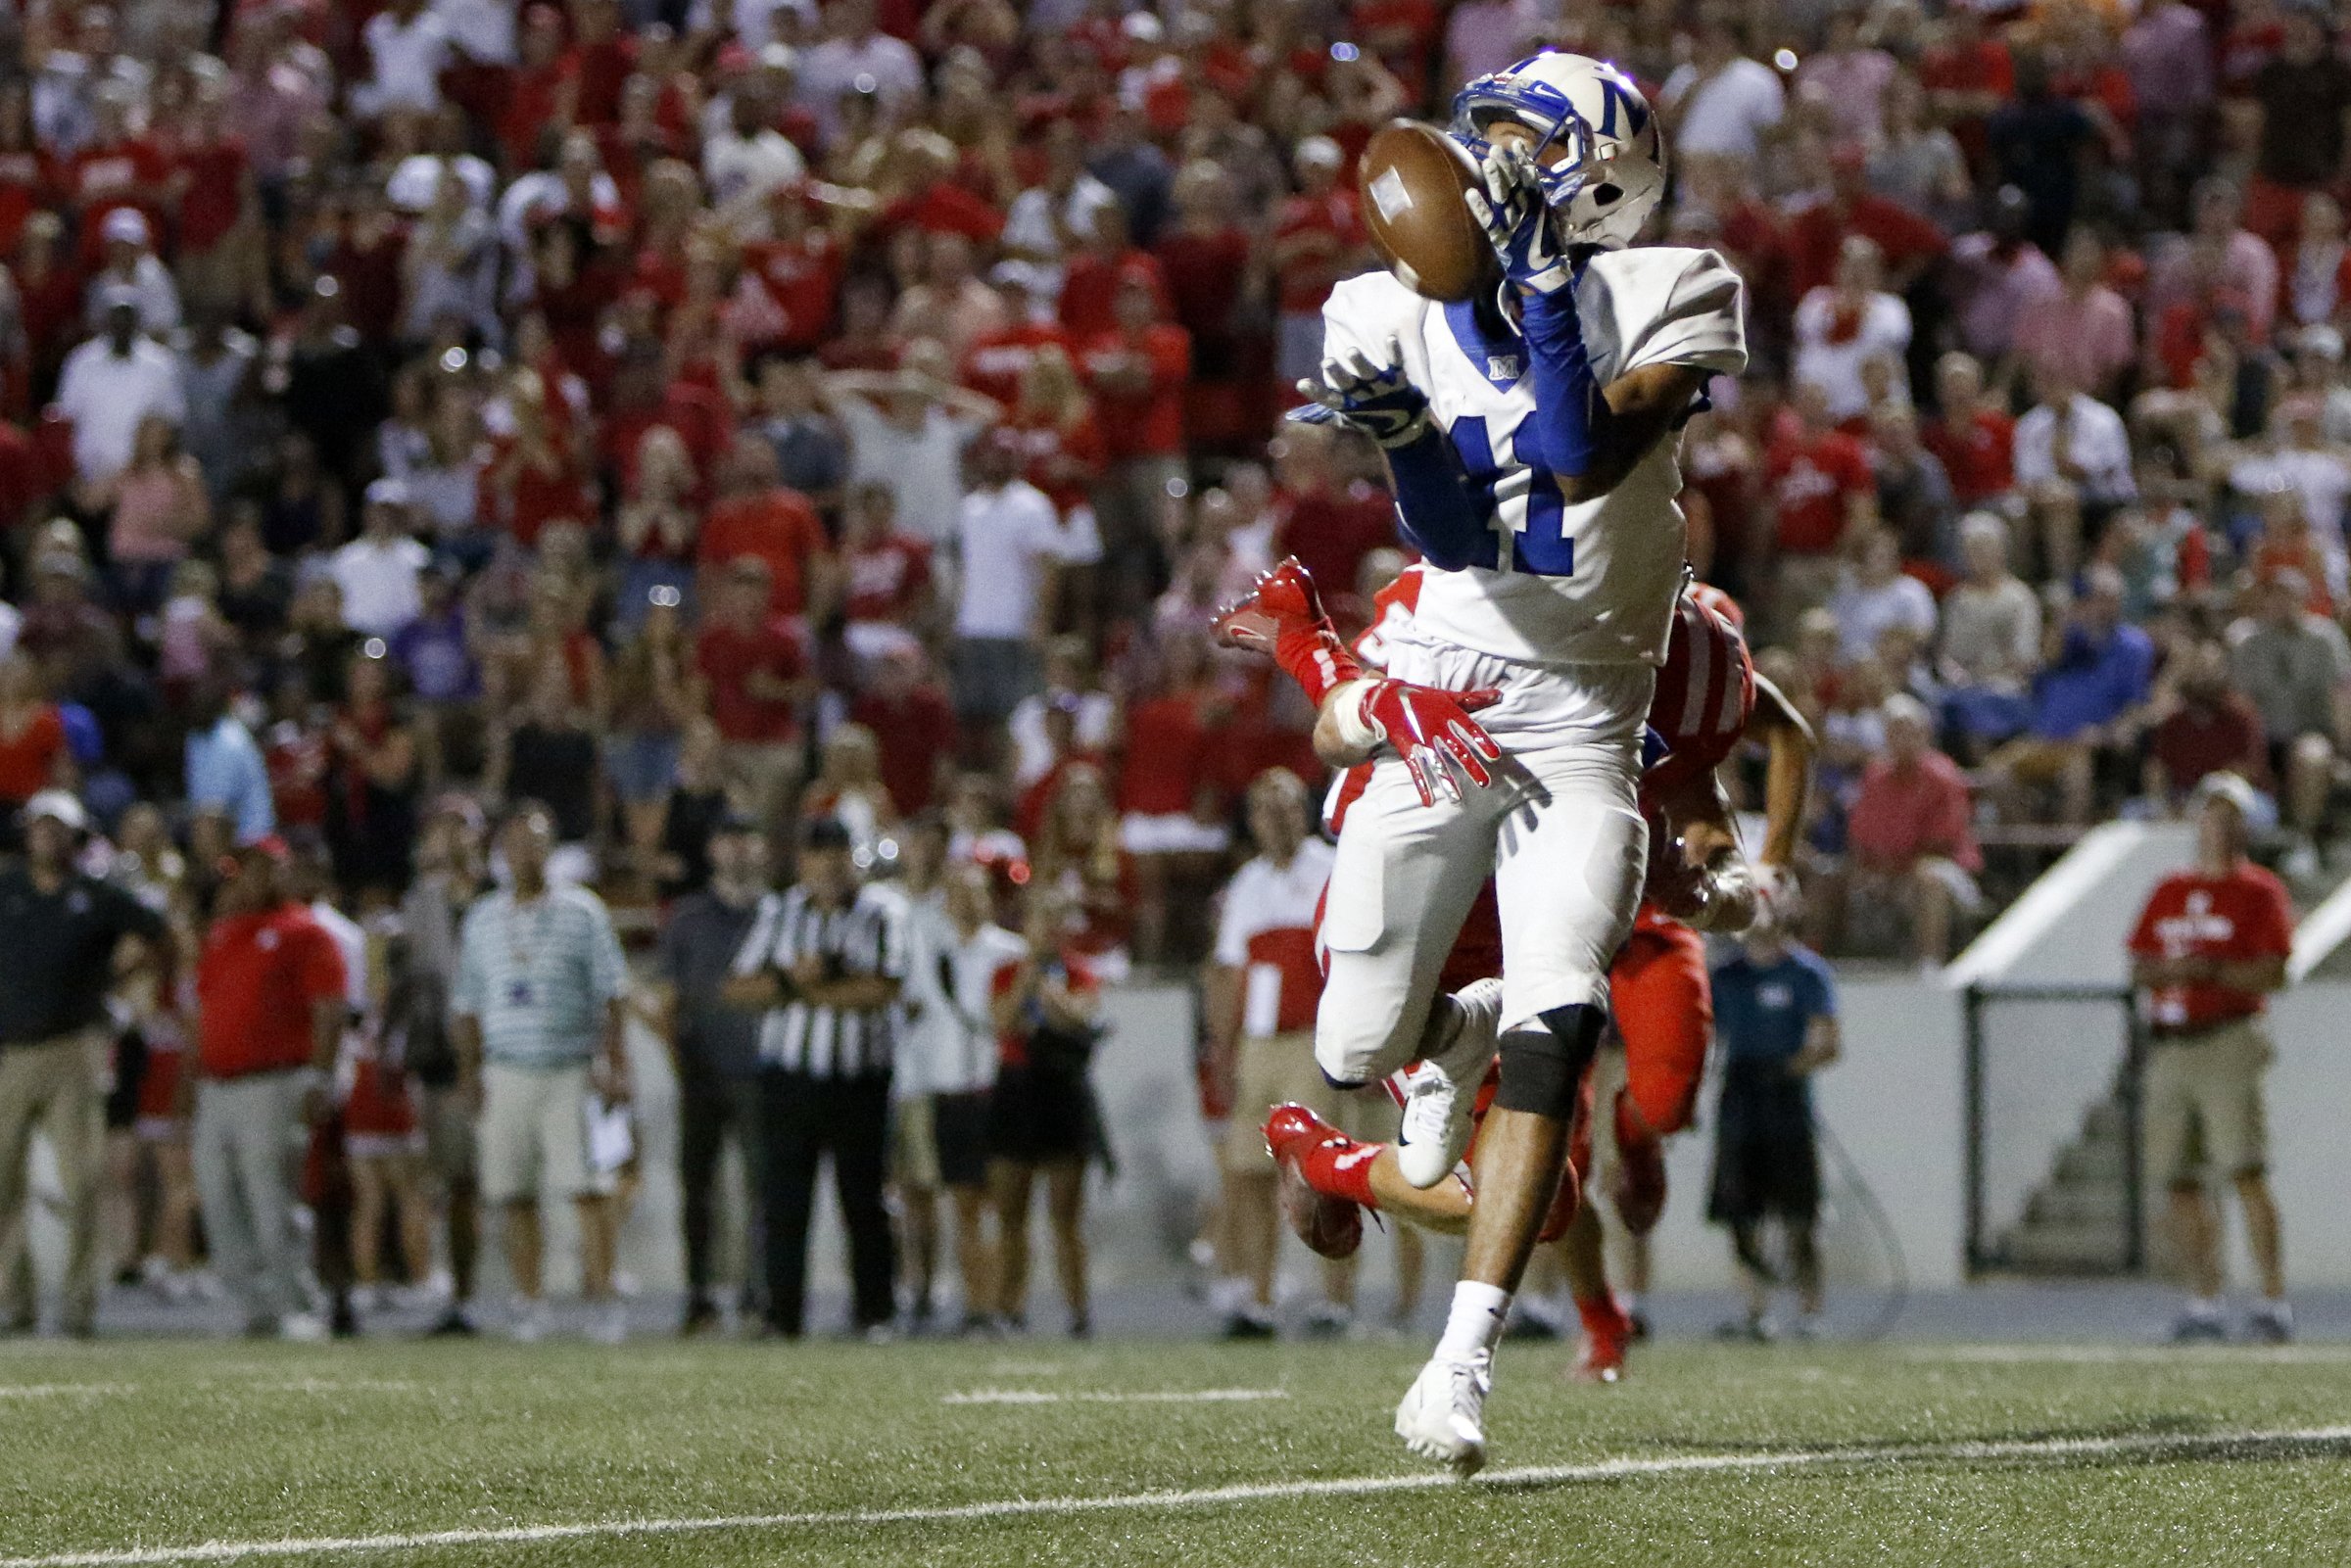 McCallie wins battle with Baylor thanks to late heroics [photos